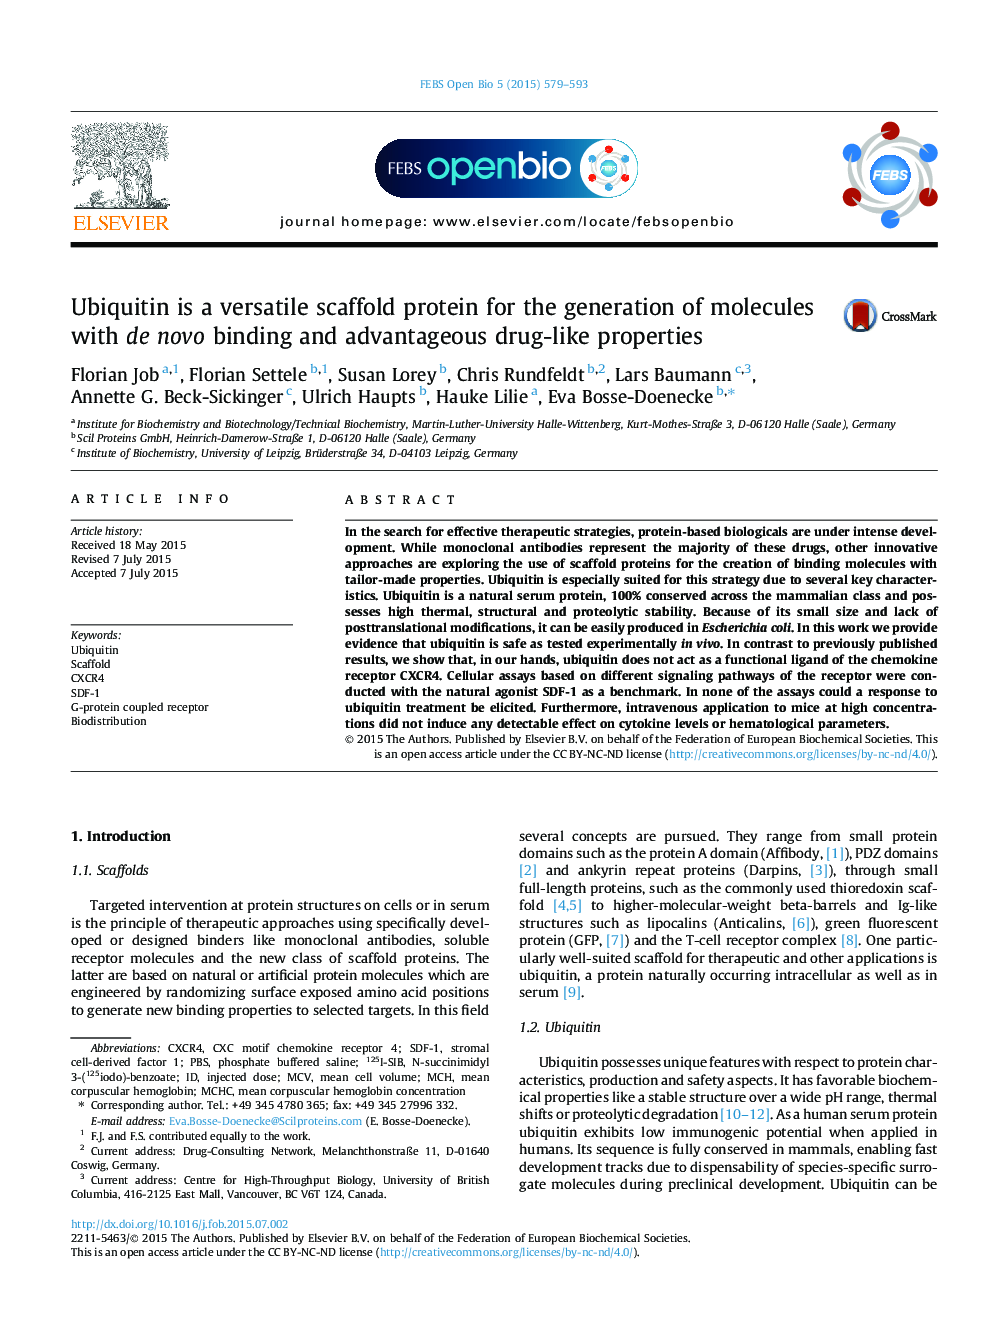 Ubiquitin is a versatile scaffold protein for the generation of molecules with de novo binding and advantageous drug-like properties